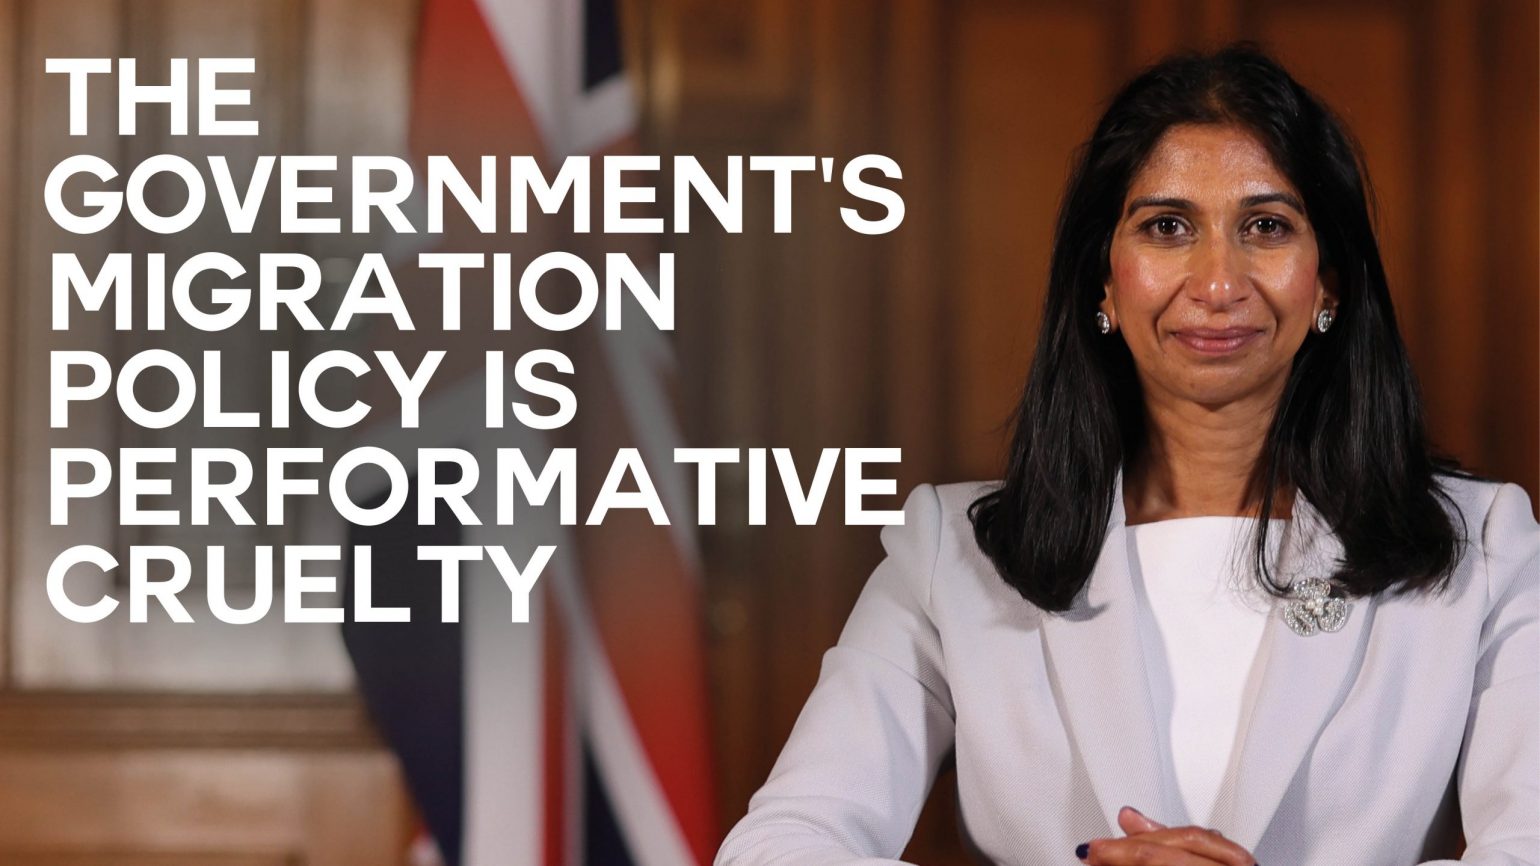 A photo of Suella Braverman with text overlaid reading "The government's migration policy is performative cruelty"